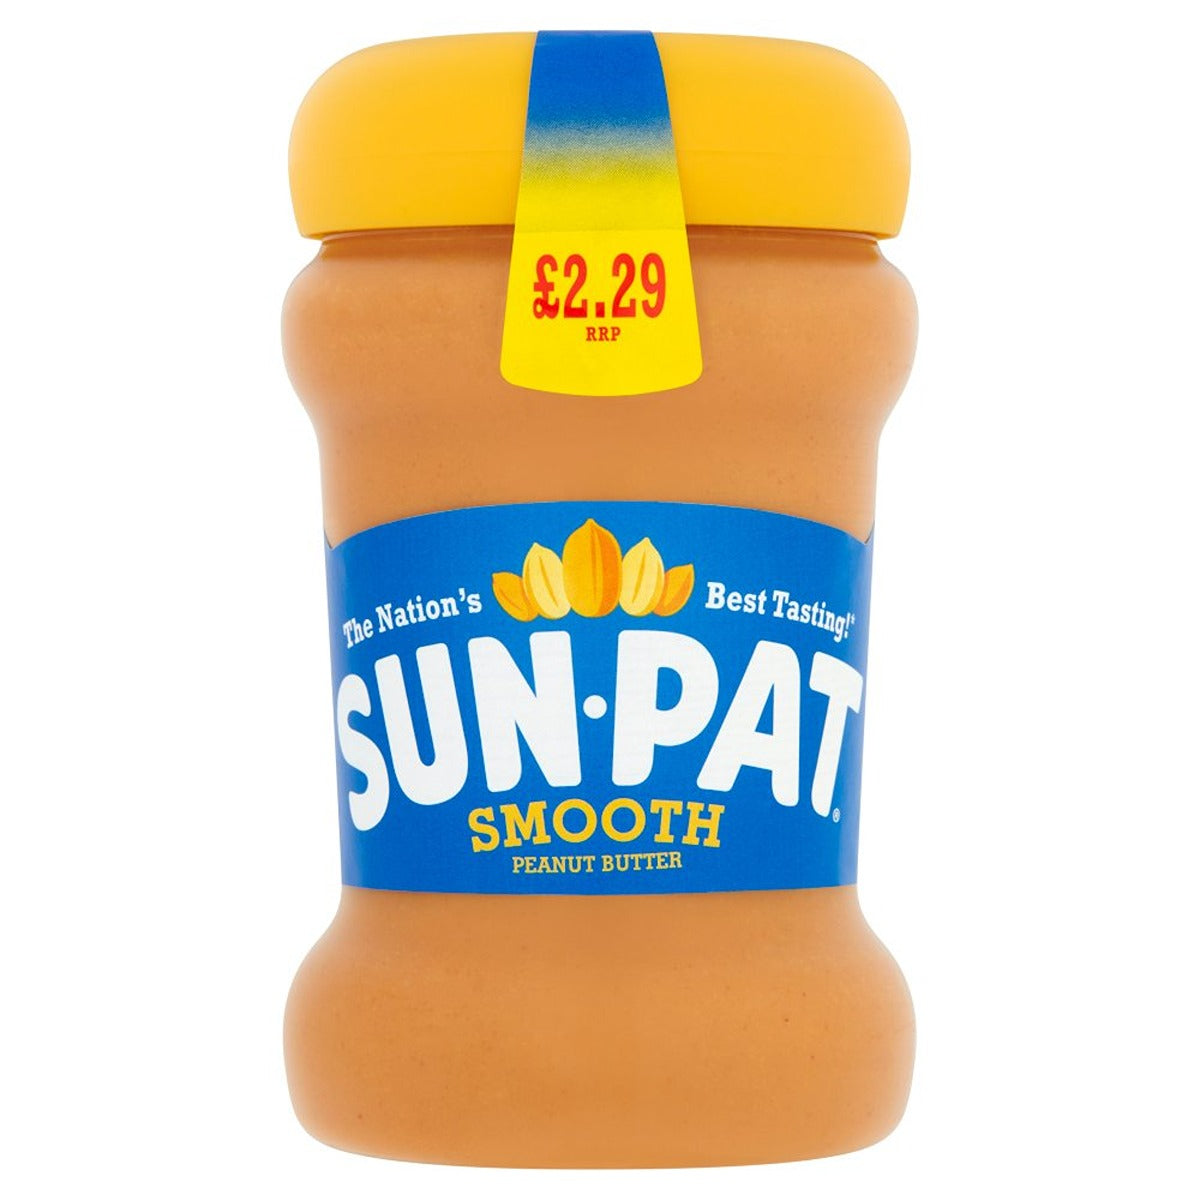 A jar of Sun Pat - Smooth Peanut Butter - 300g on a white background.